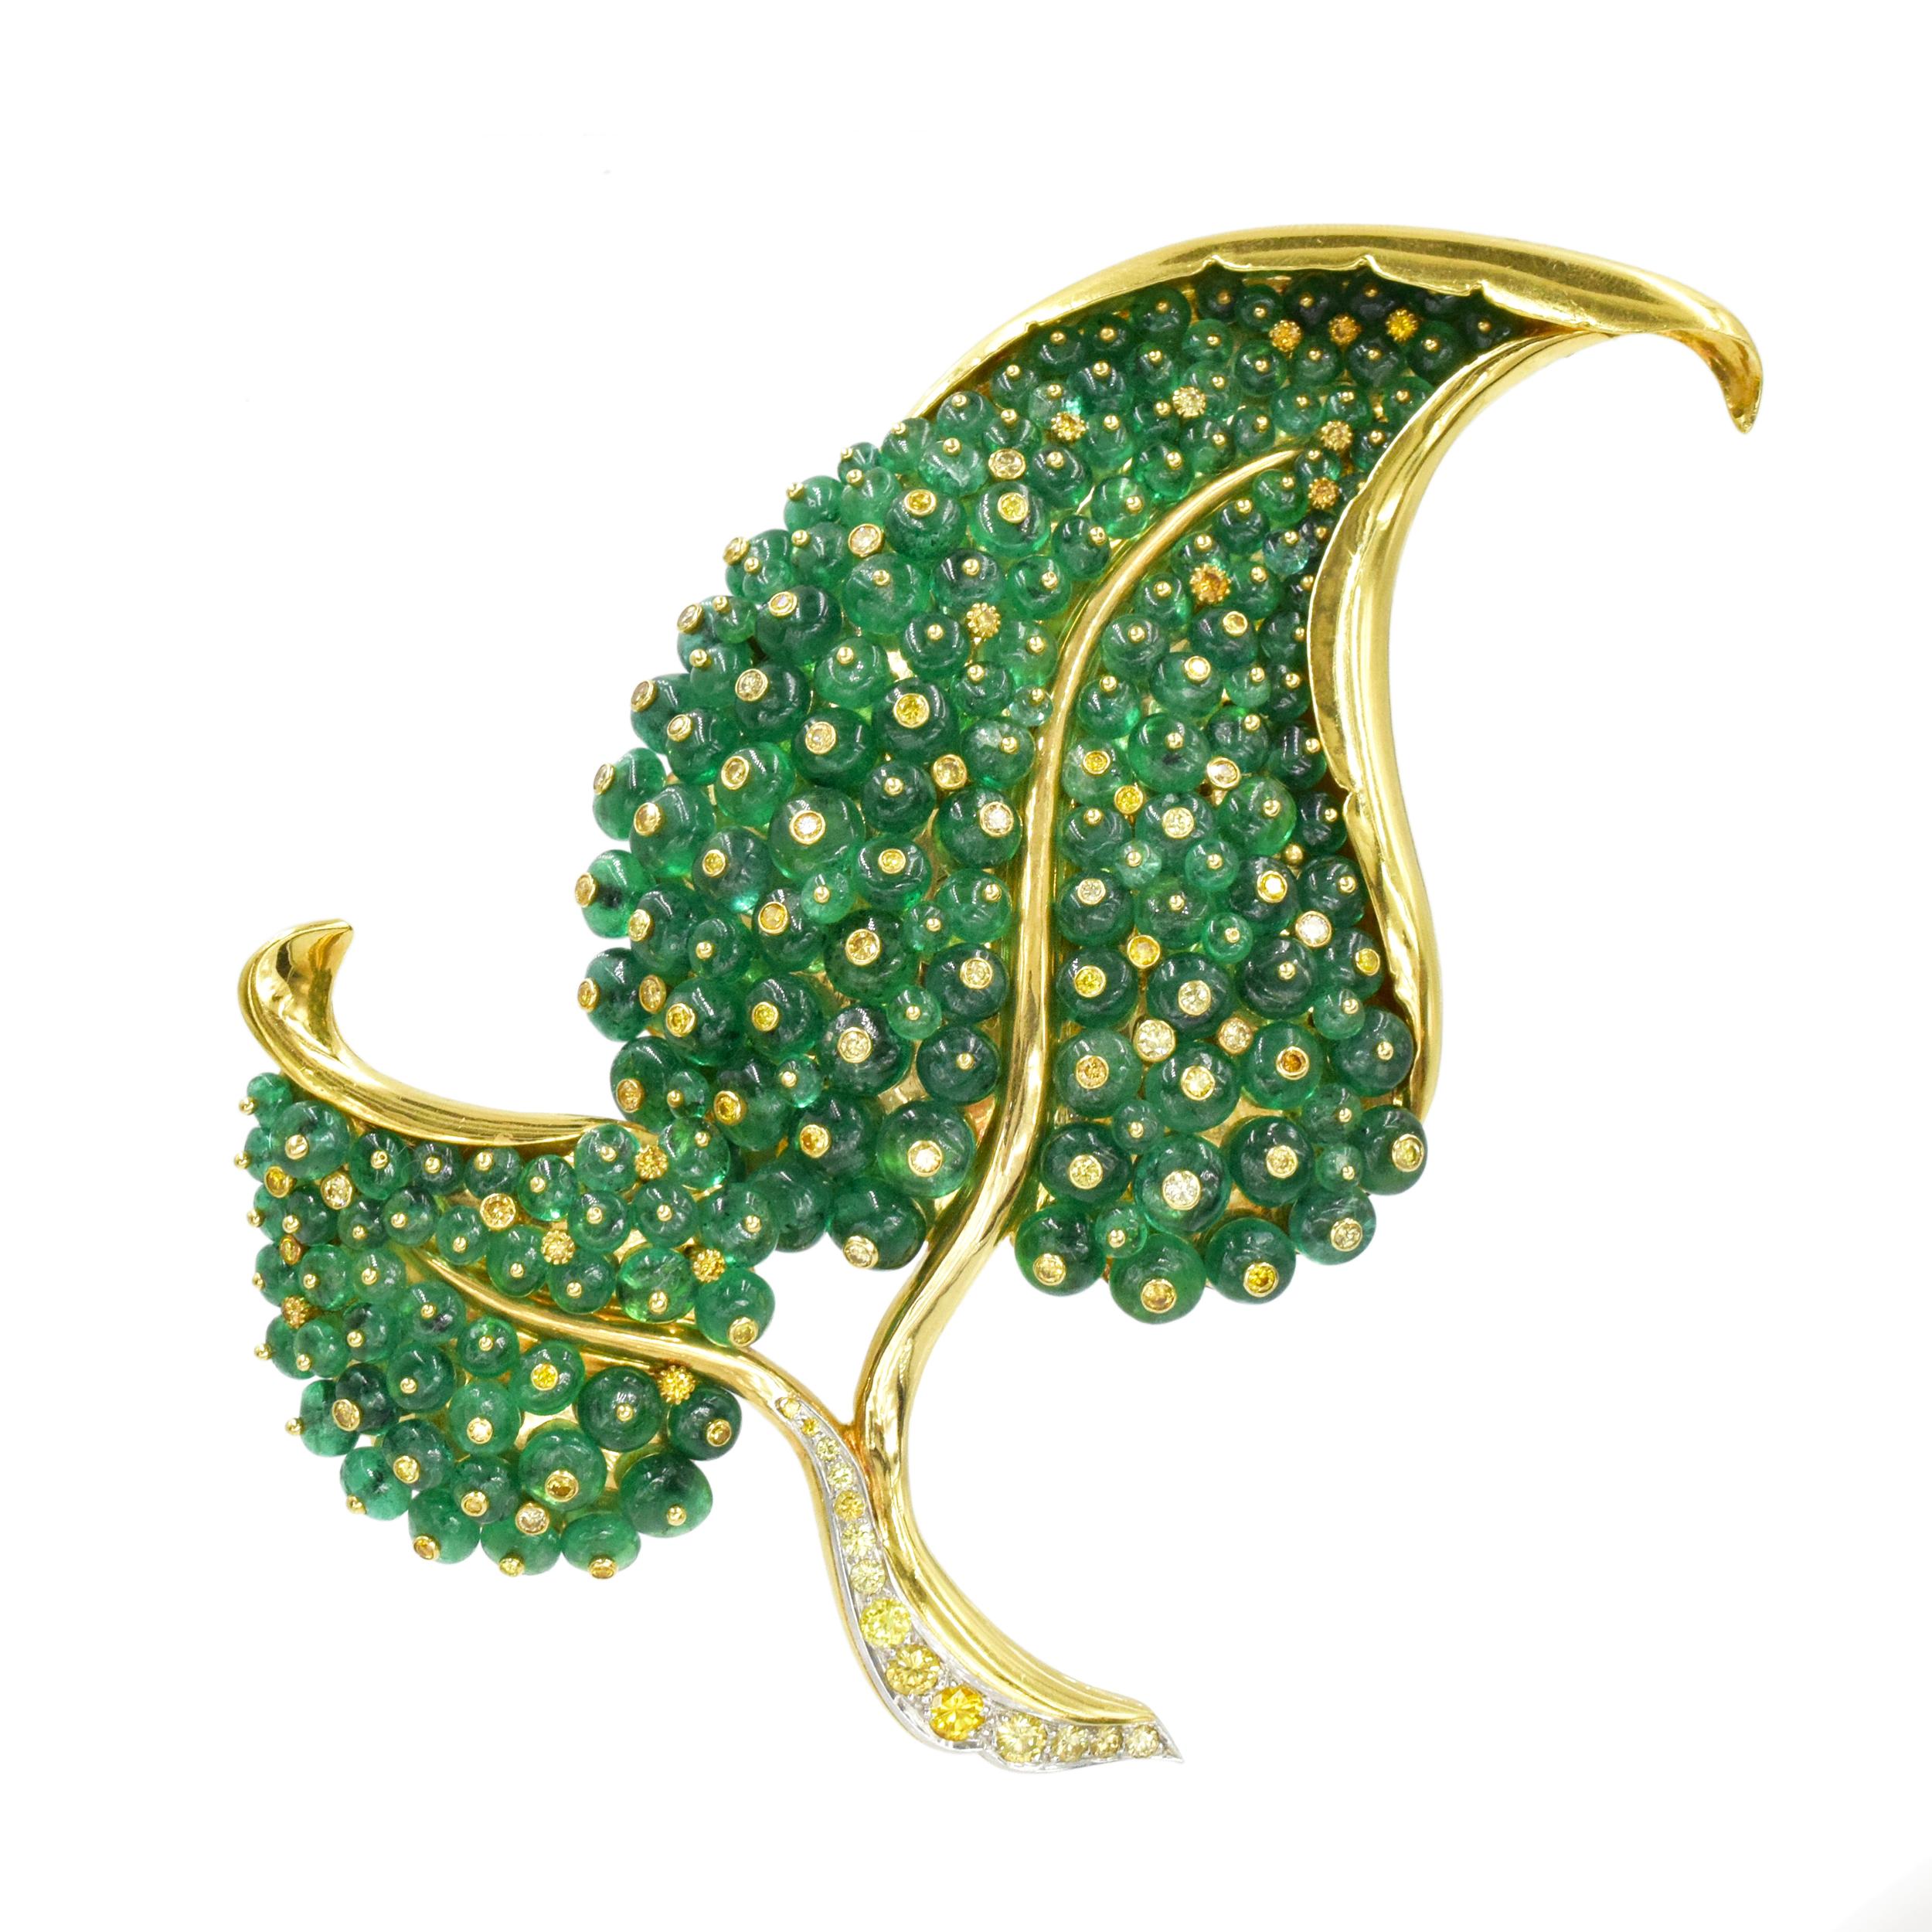 Fred Leighton Gold, Emerald and Colored Diamond Brooch In 18k Yellow Gold. This brooch is created in a foliate design, adorned with emerald beads with total weight of approximately 40- 50ct. Round brilliant cut yellow diamonds with total weight of